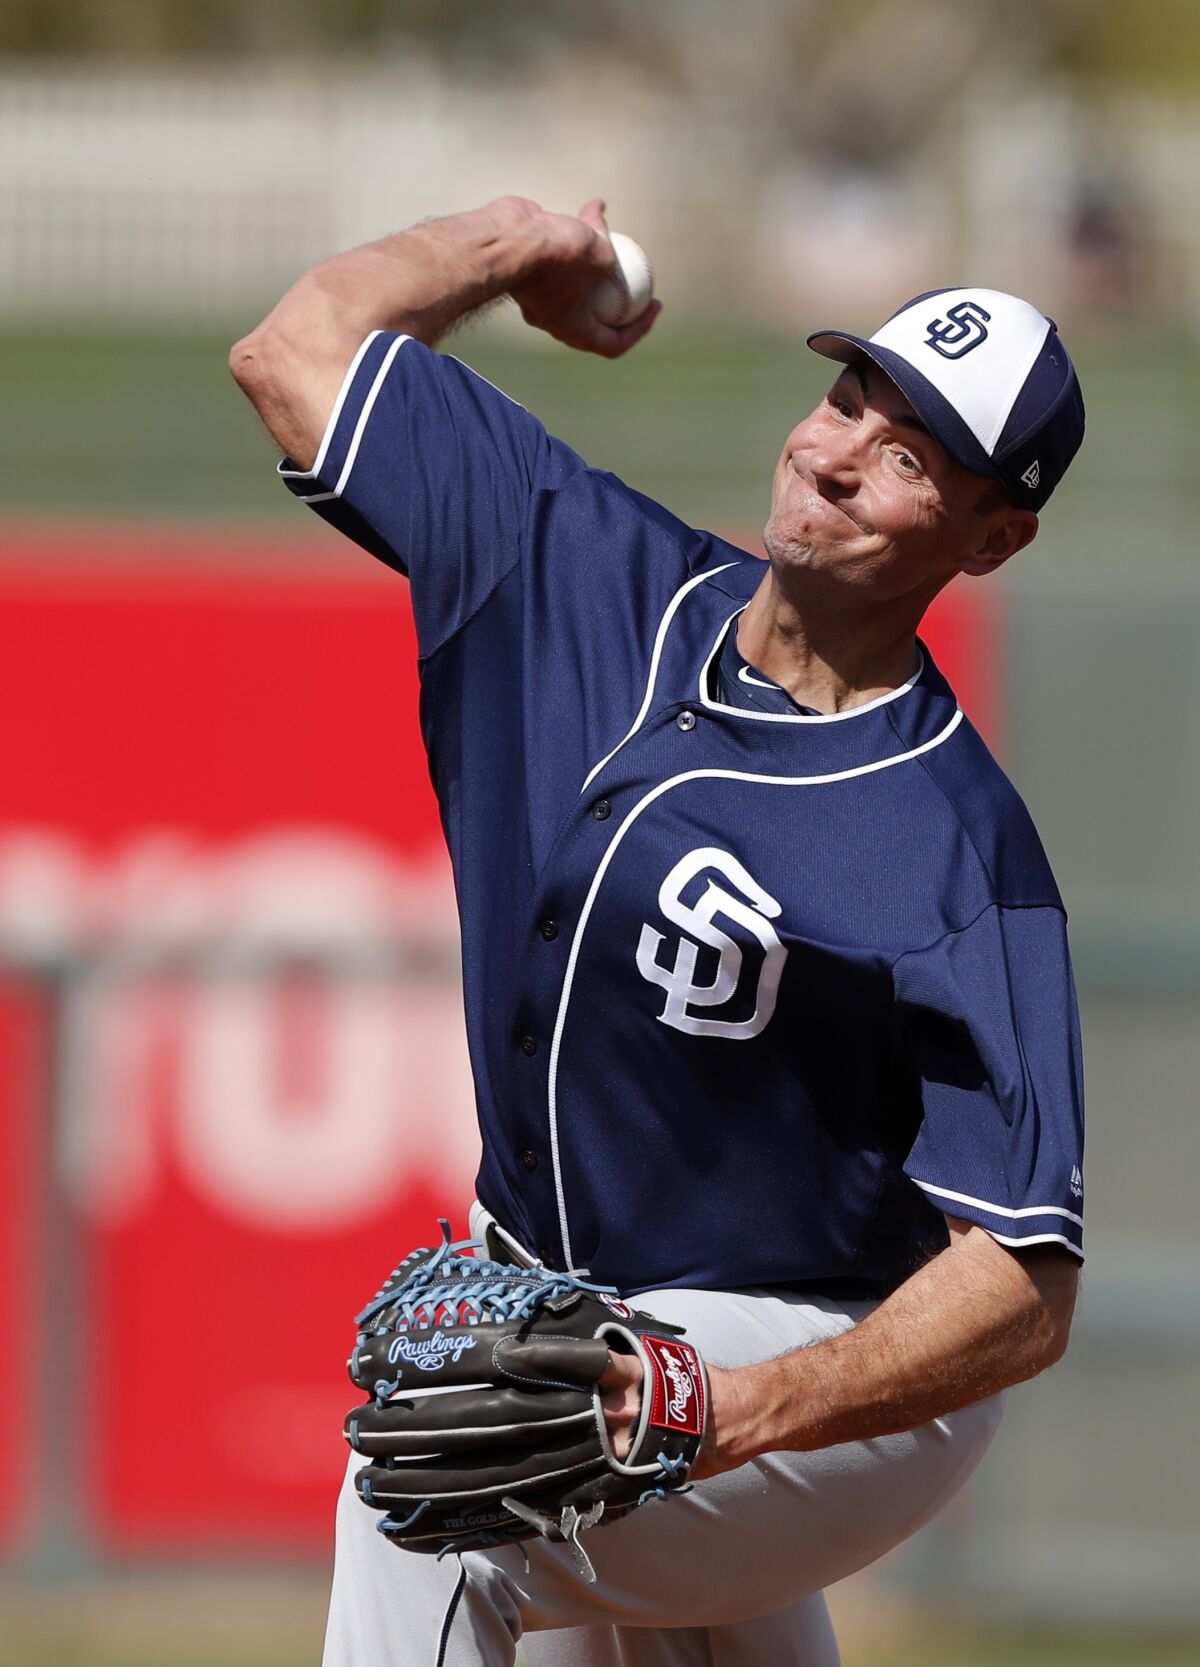 FILE - In this March 1, 2018, file photo, San Diego Padres pitcher Chris Young throws during the third inning of a spring training baseball game against the Texas Rangers in Surprise, Ariz. The Rangers hired Young as executive vice president and general manager Friday, Dec. 4, 2020, bringing the Major League Baseball executive home to work under president of baseball operations Jon Daniels, the club's GM since 2005. (AP Photo/Charlie Neibergall, File)